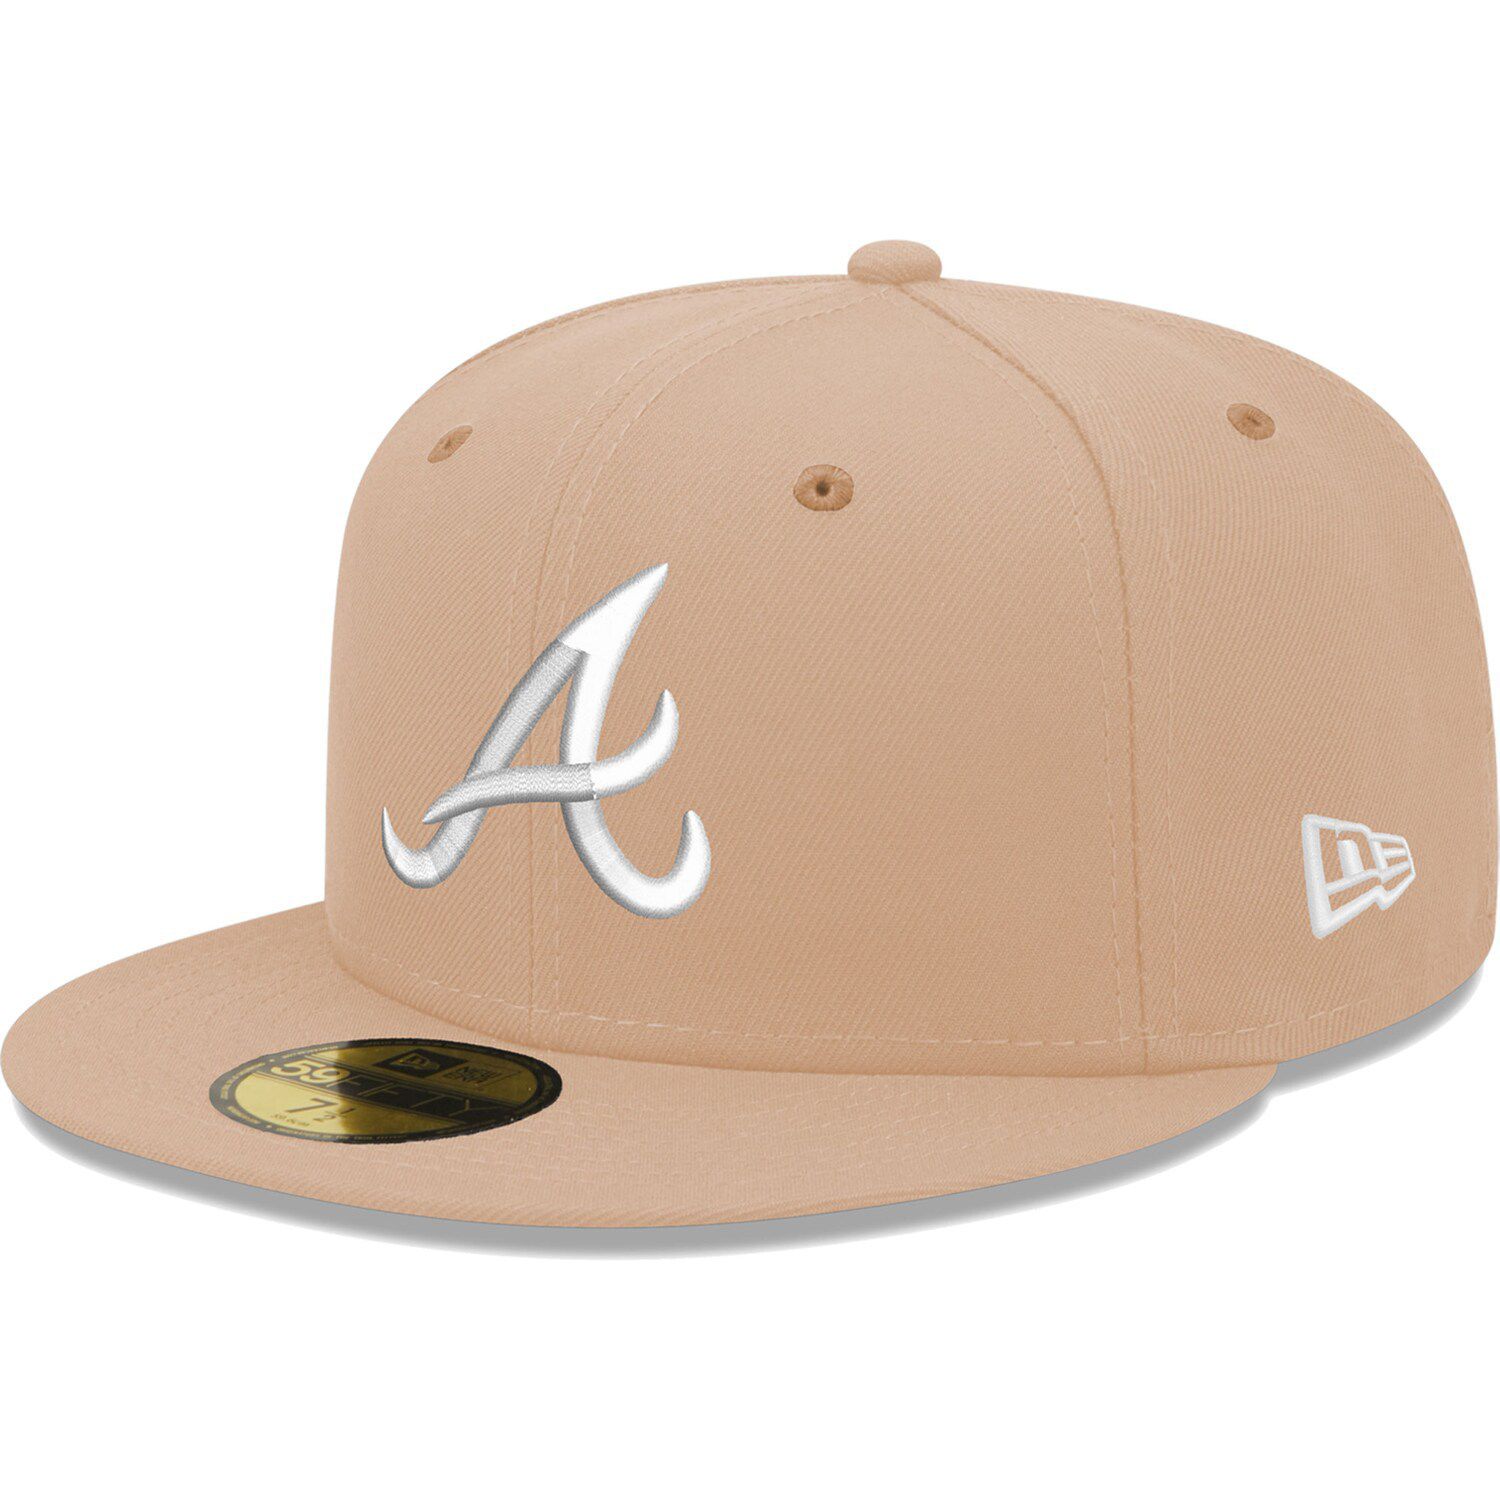 Atlanta Braves Gold Leaf 59FIFTY Fitted Hat, Blue - Size: 8, MLB by New Era